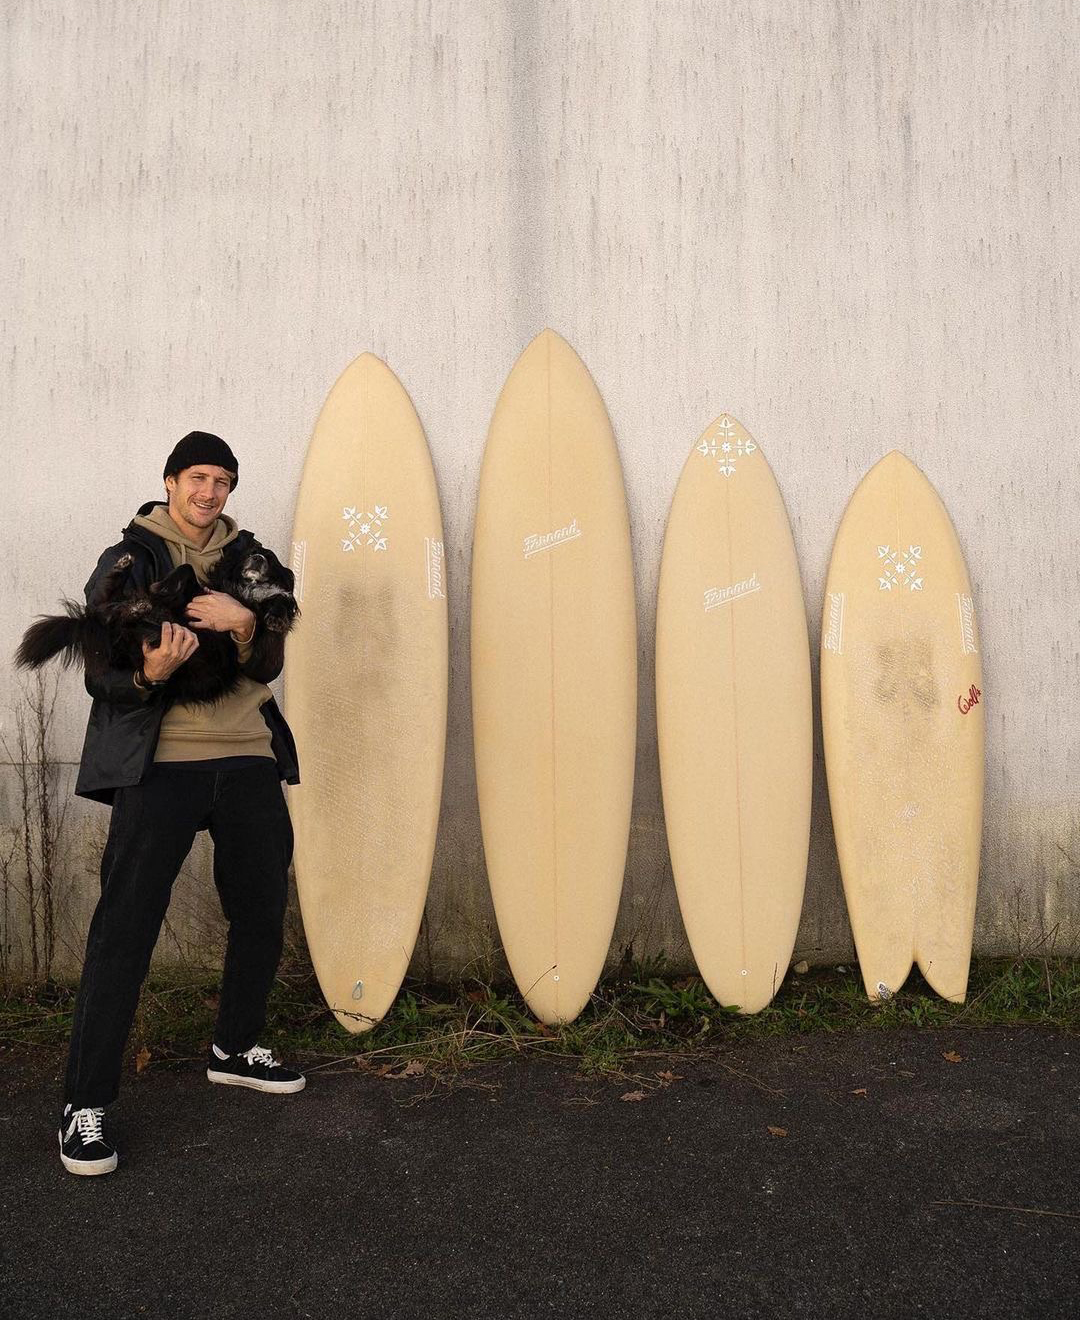 Polyola ambassador Boris Romann stands in front of his Polyola Surfboard quiver